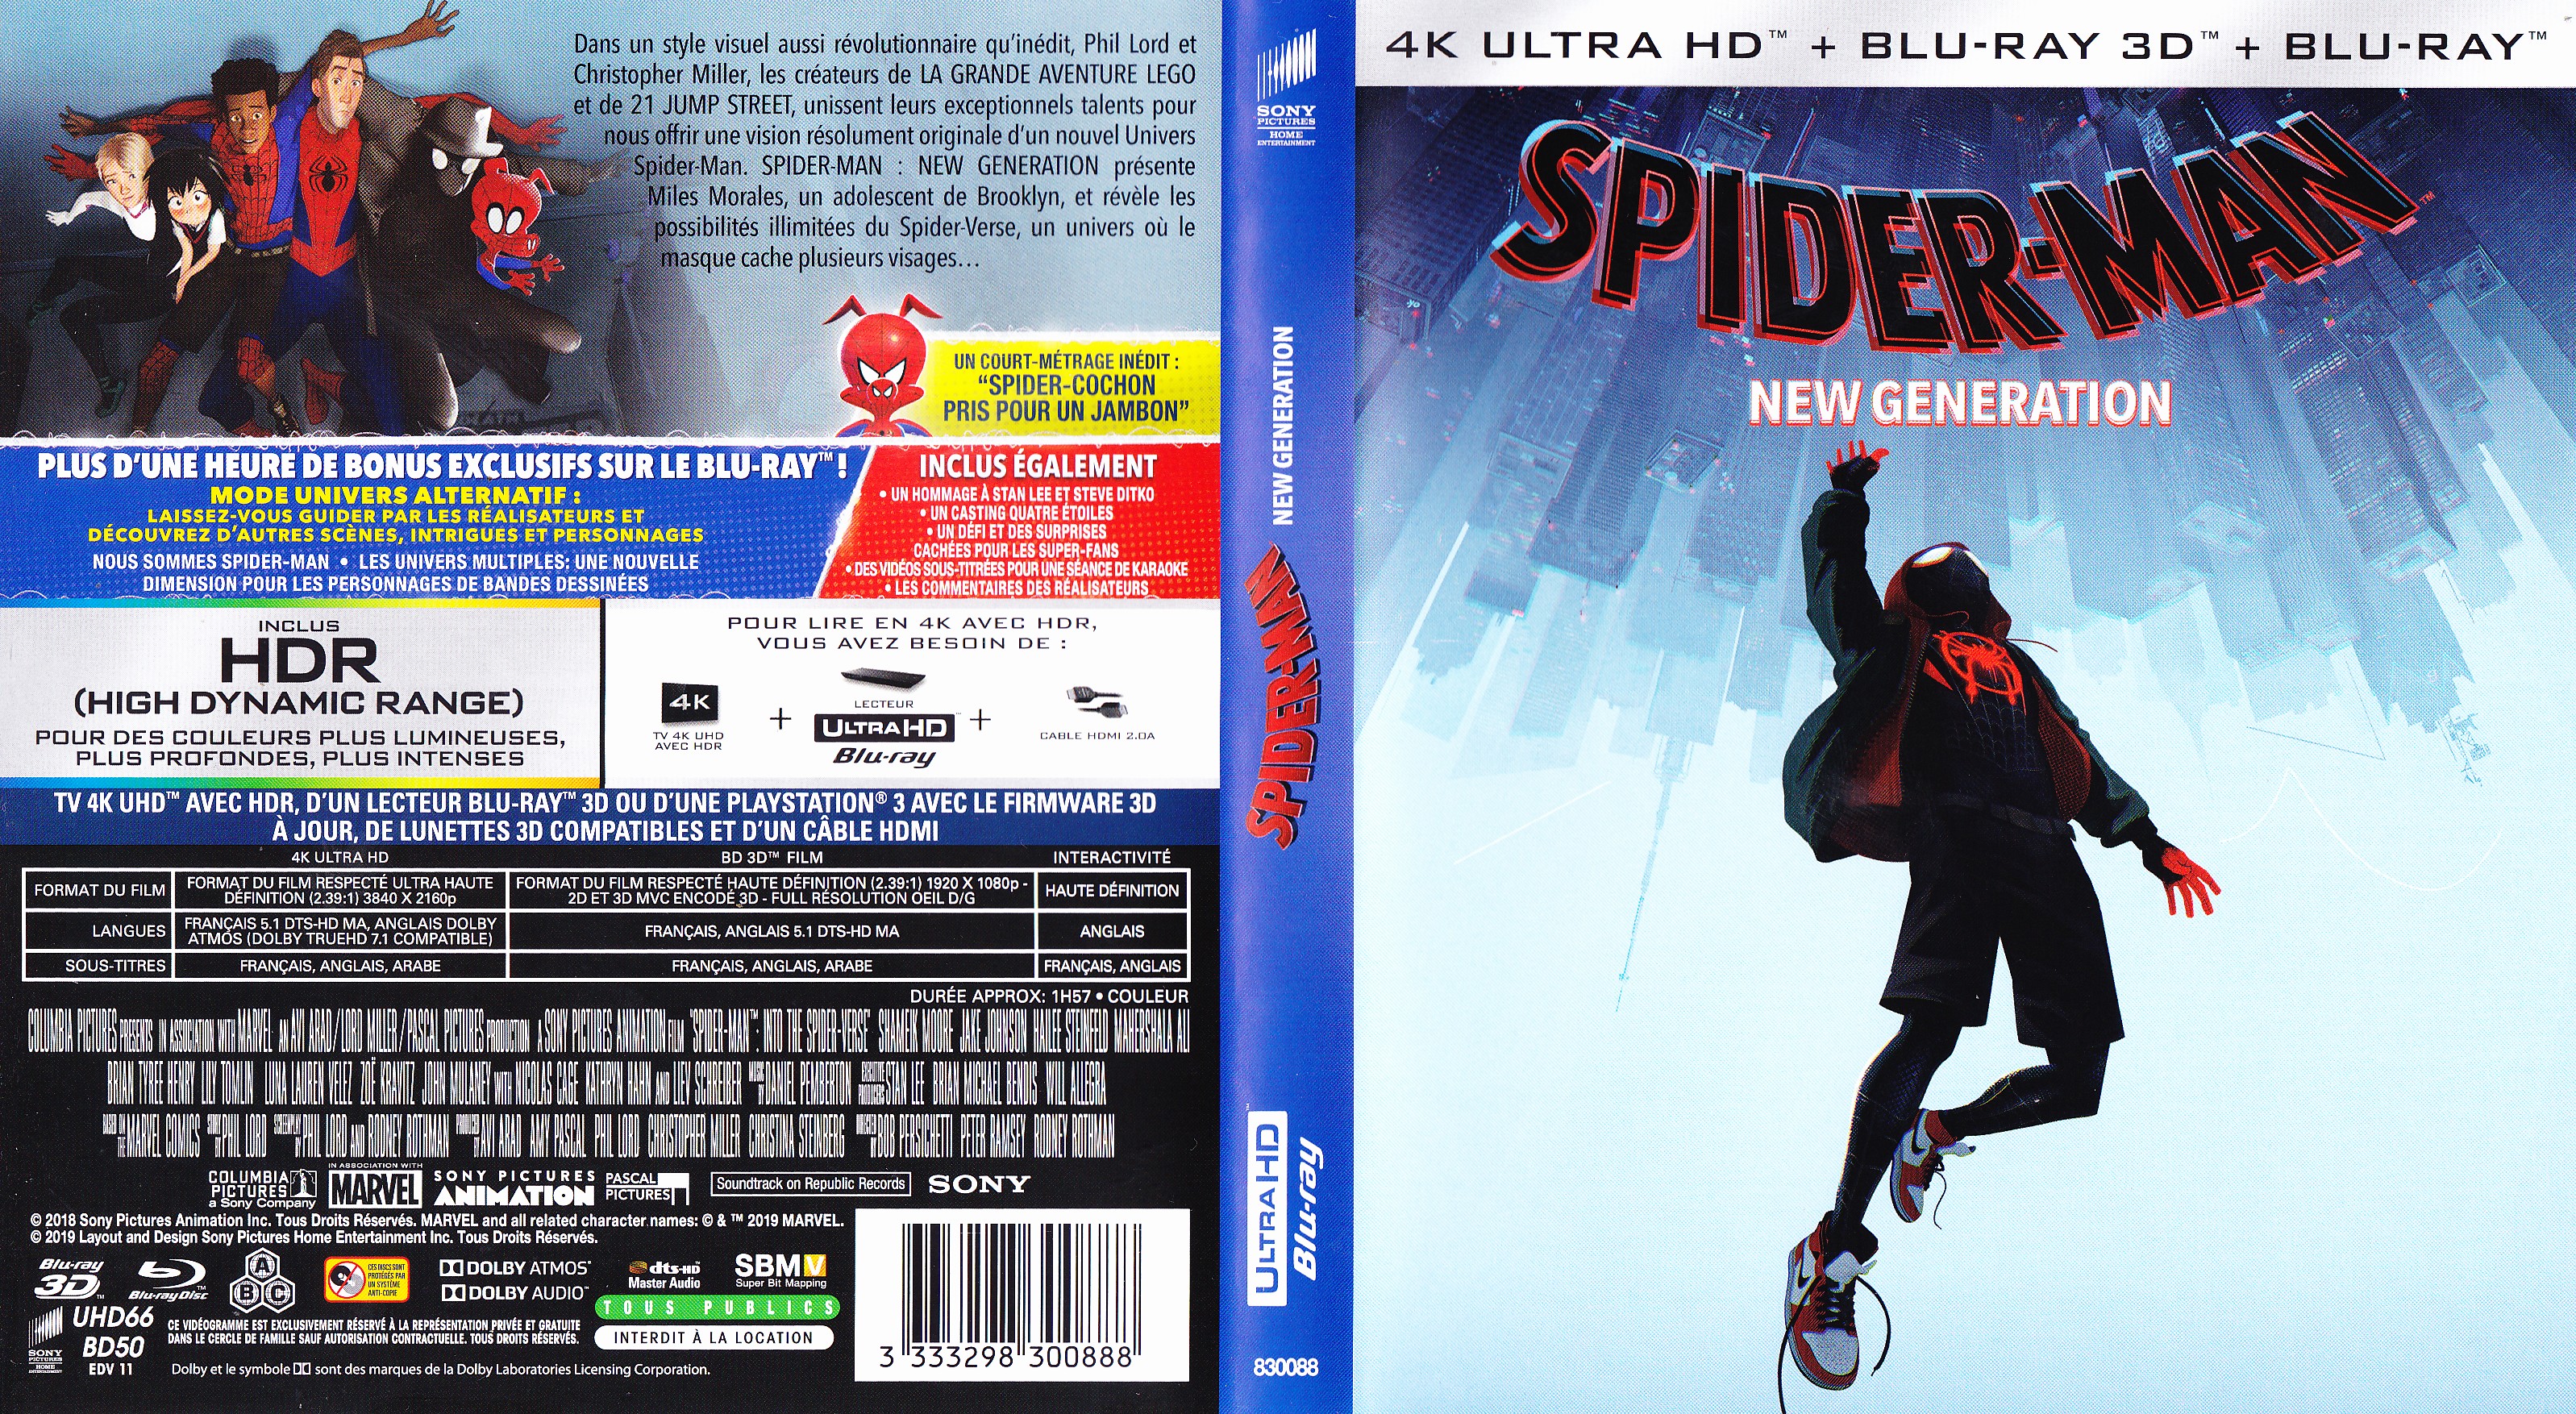 Jaquette DVD Spider-man New Generation (BLU-RAY)